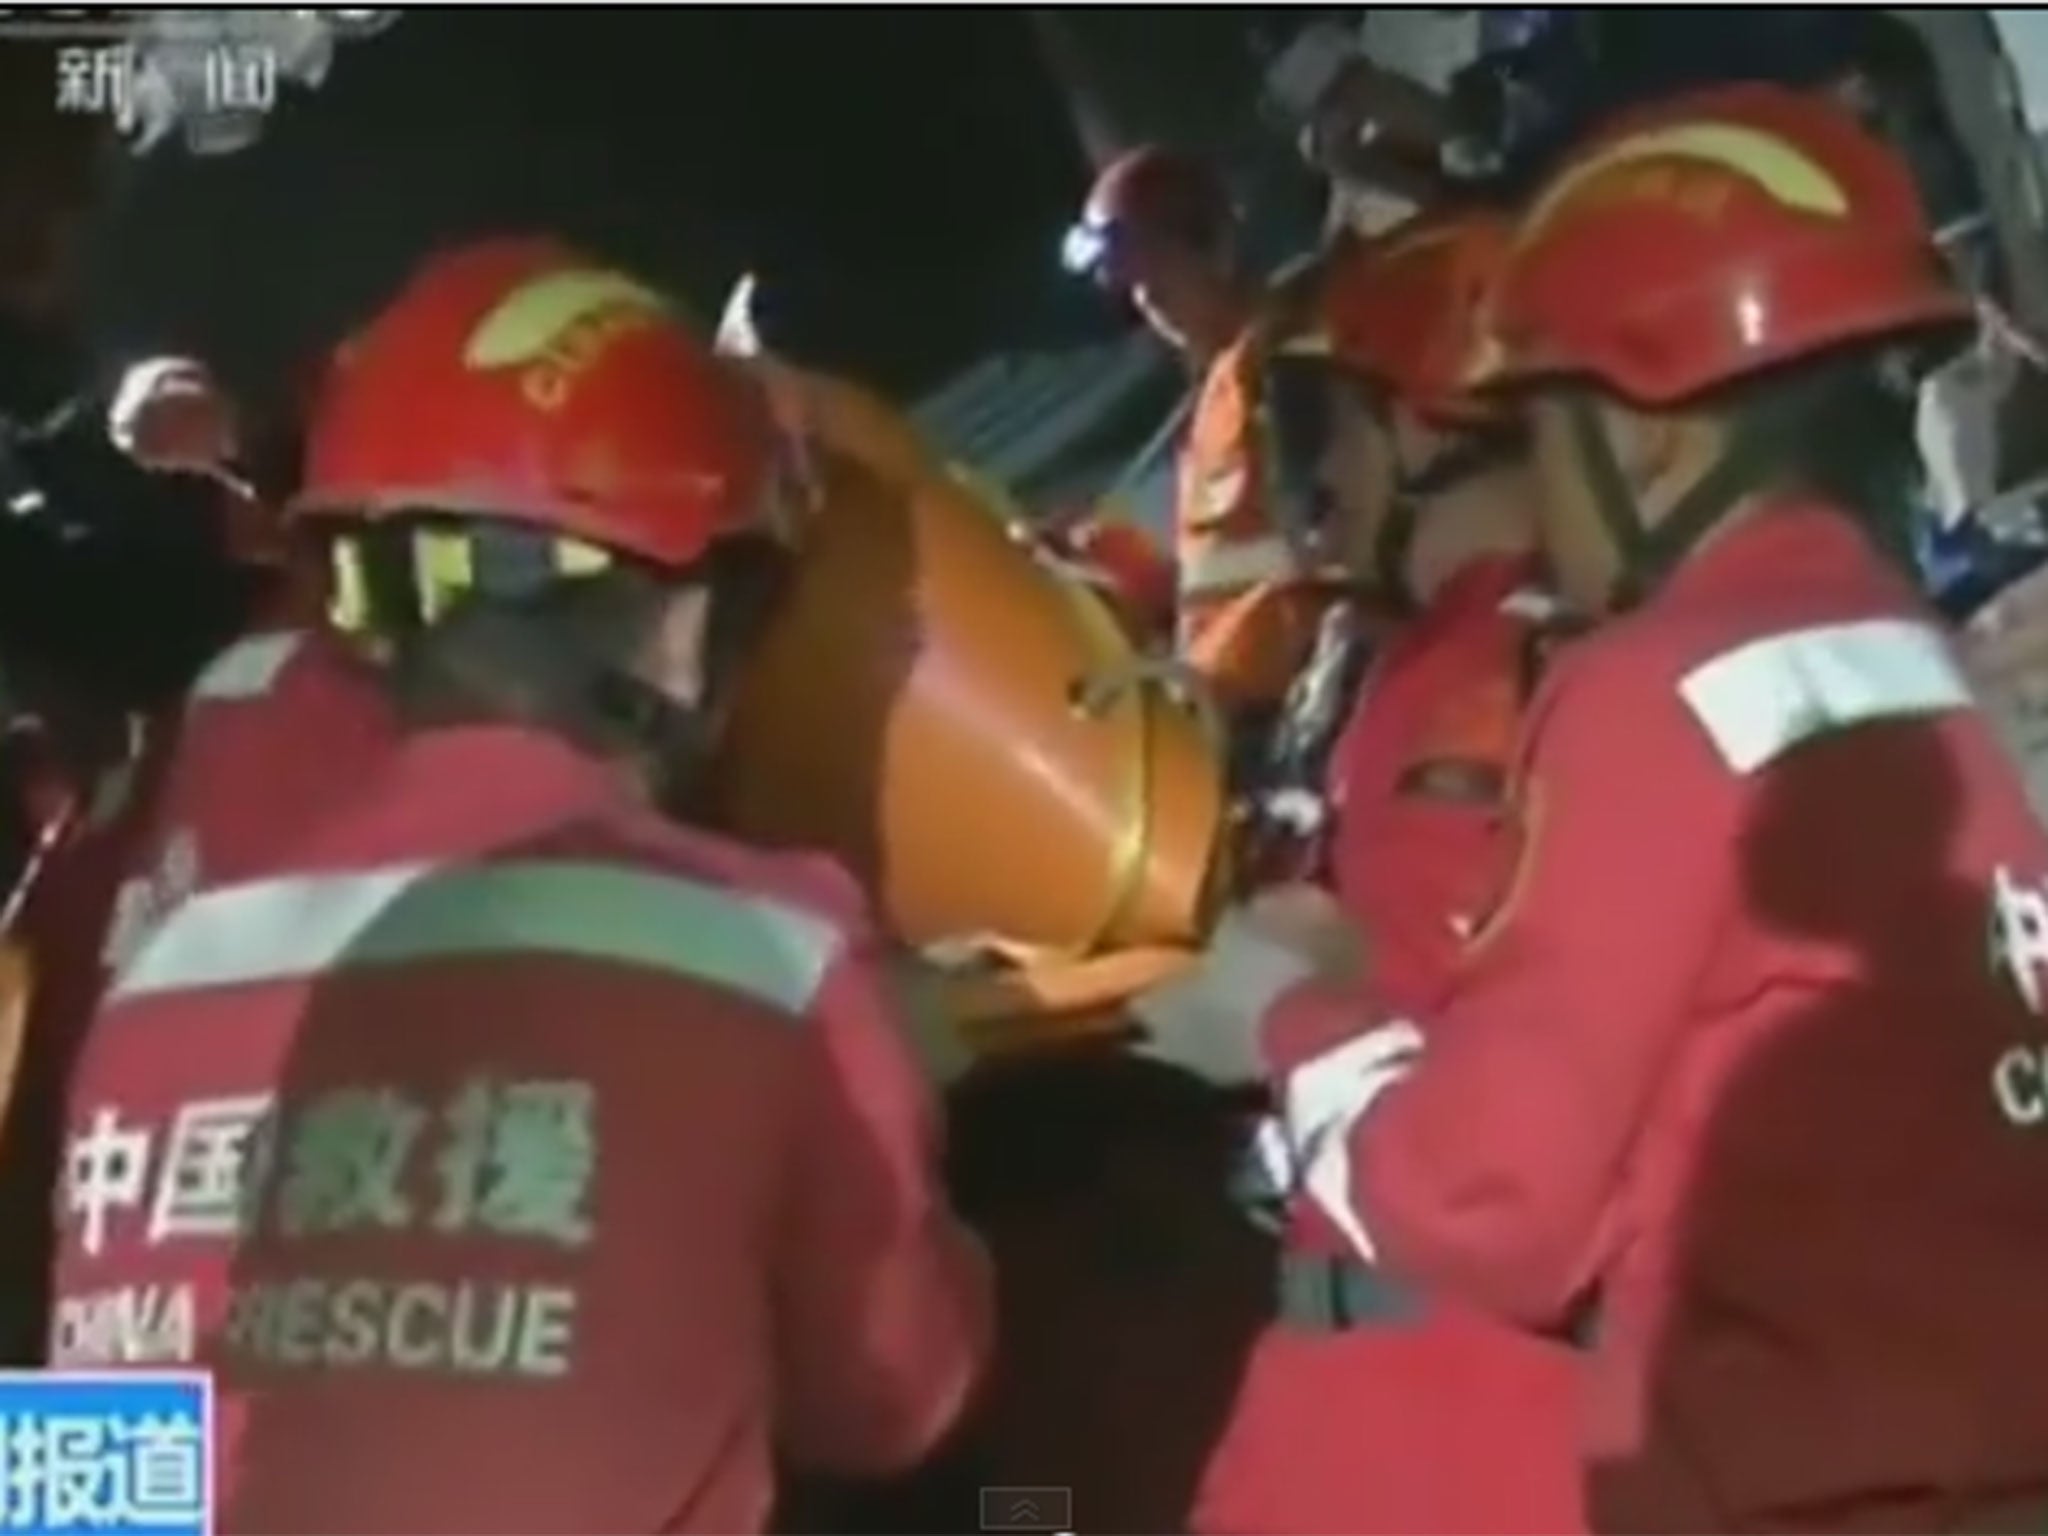 The man had been trapped under the rubble for a total of 62 hours